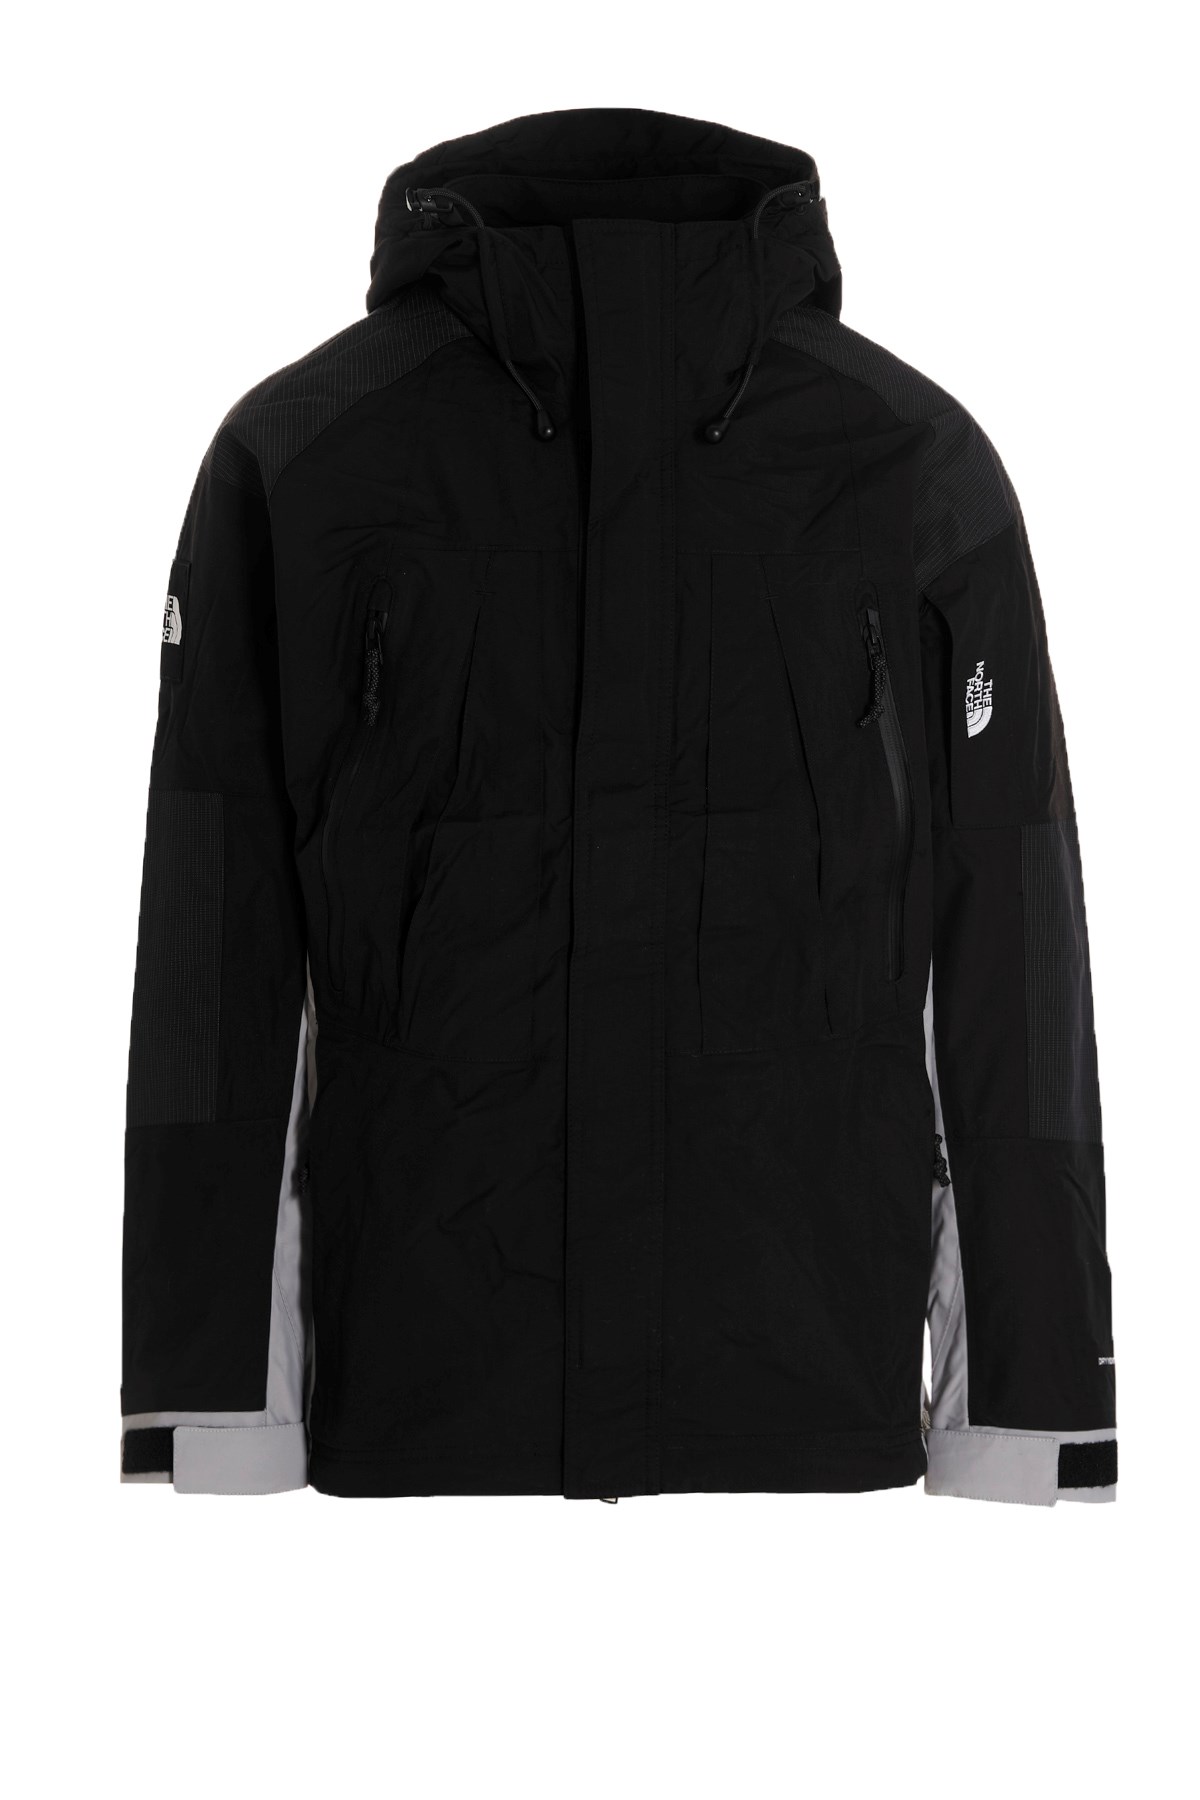 THE NORTH FACE Jacke 'Phlego 2L Dryvent'